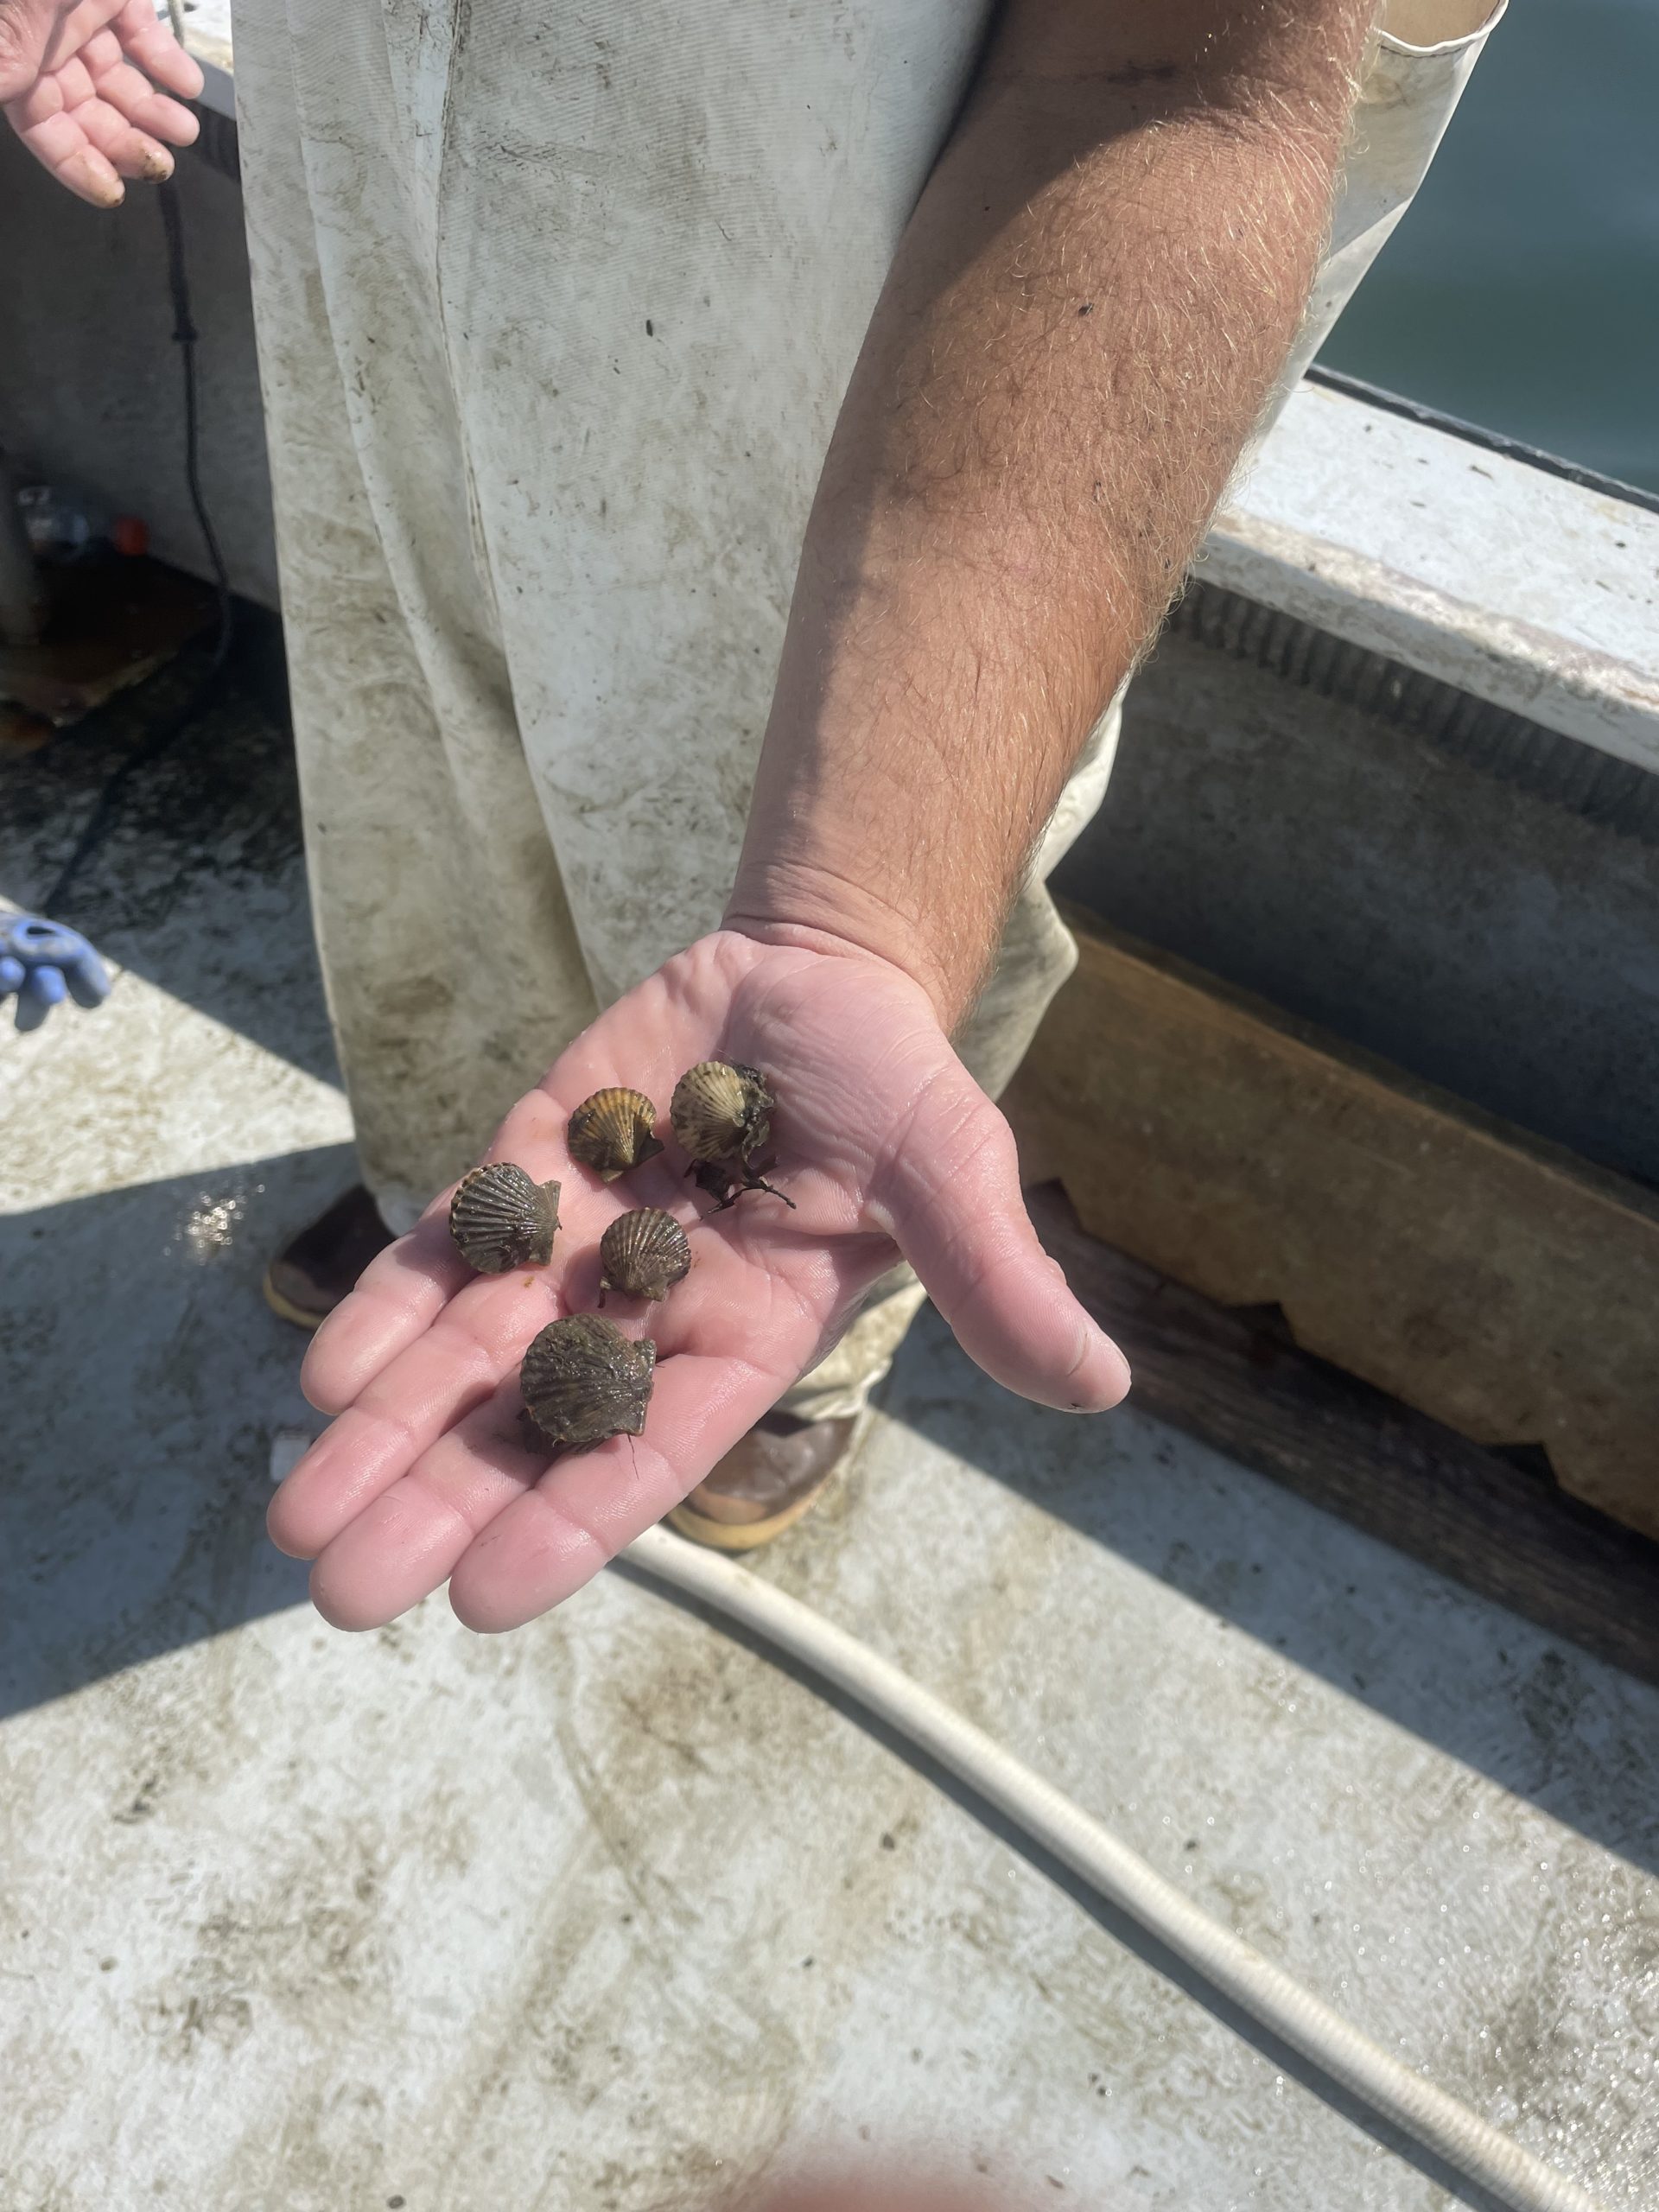 Bug bay scallops are abundant this summer but adults have suffered a widespread die-off for the third summer in a row.